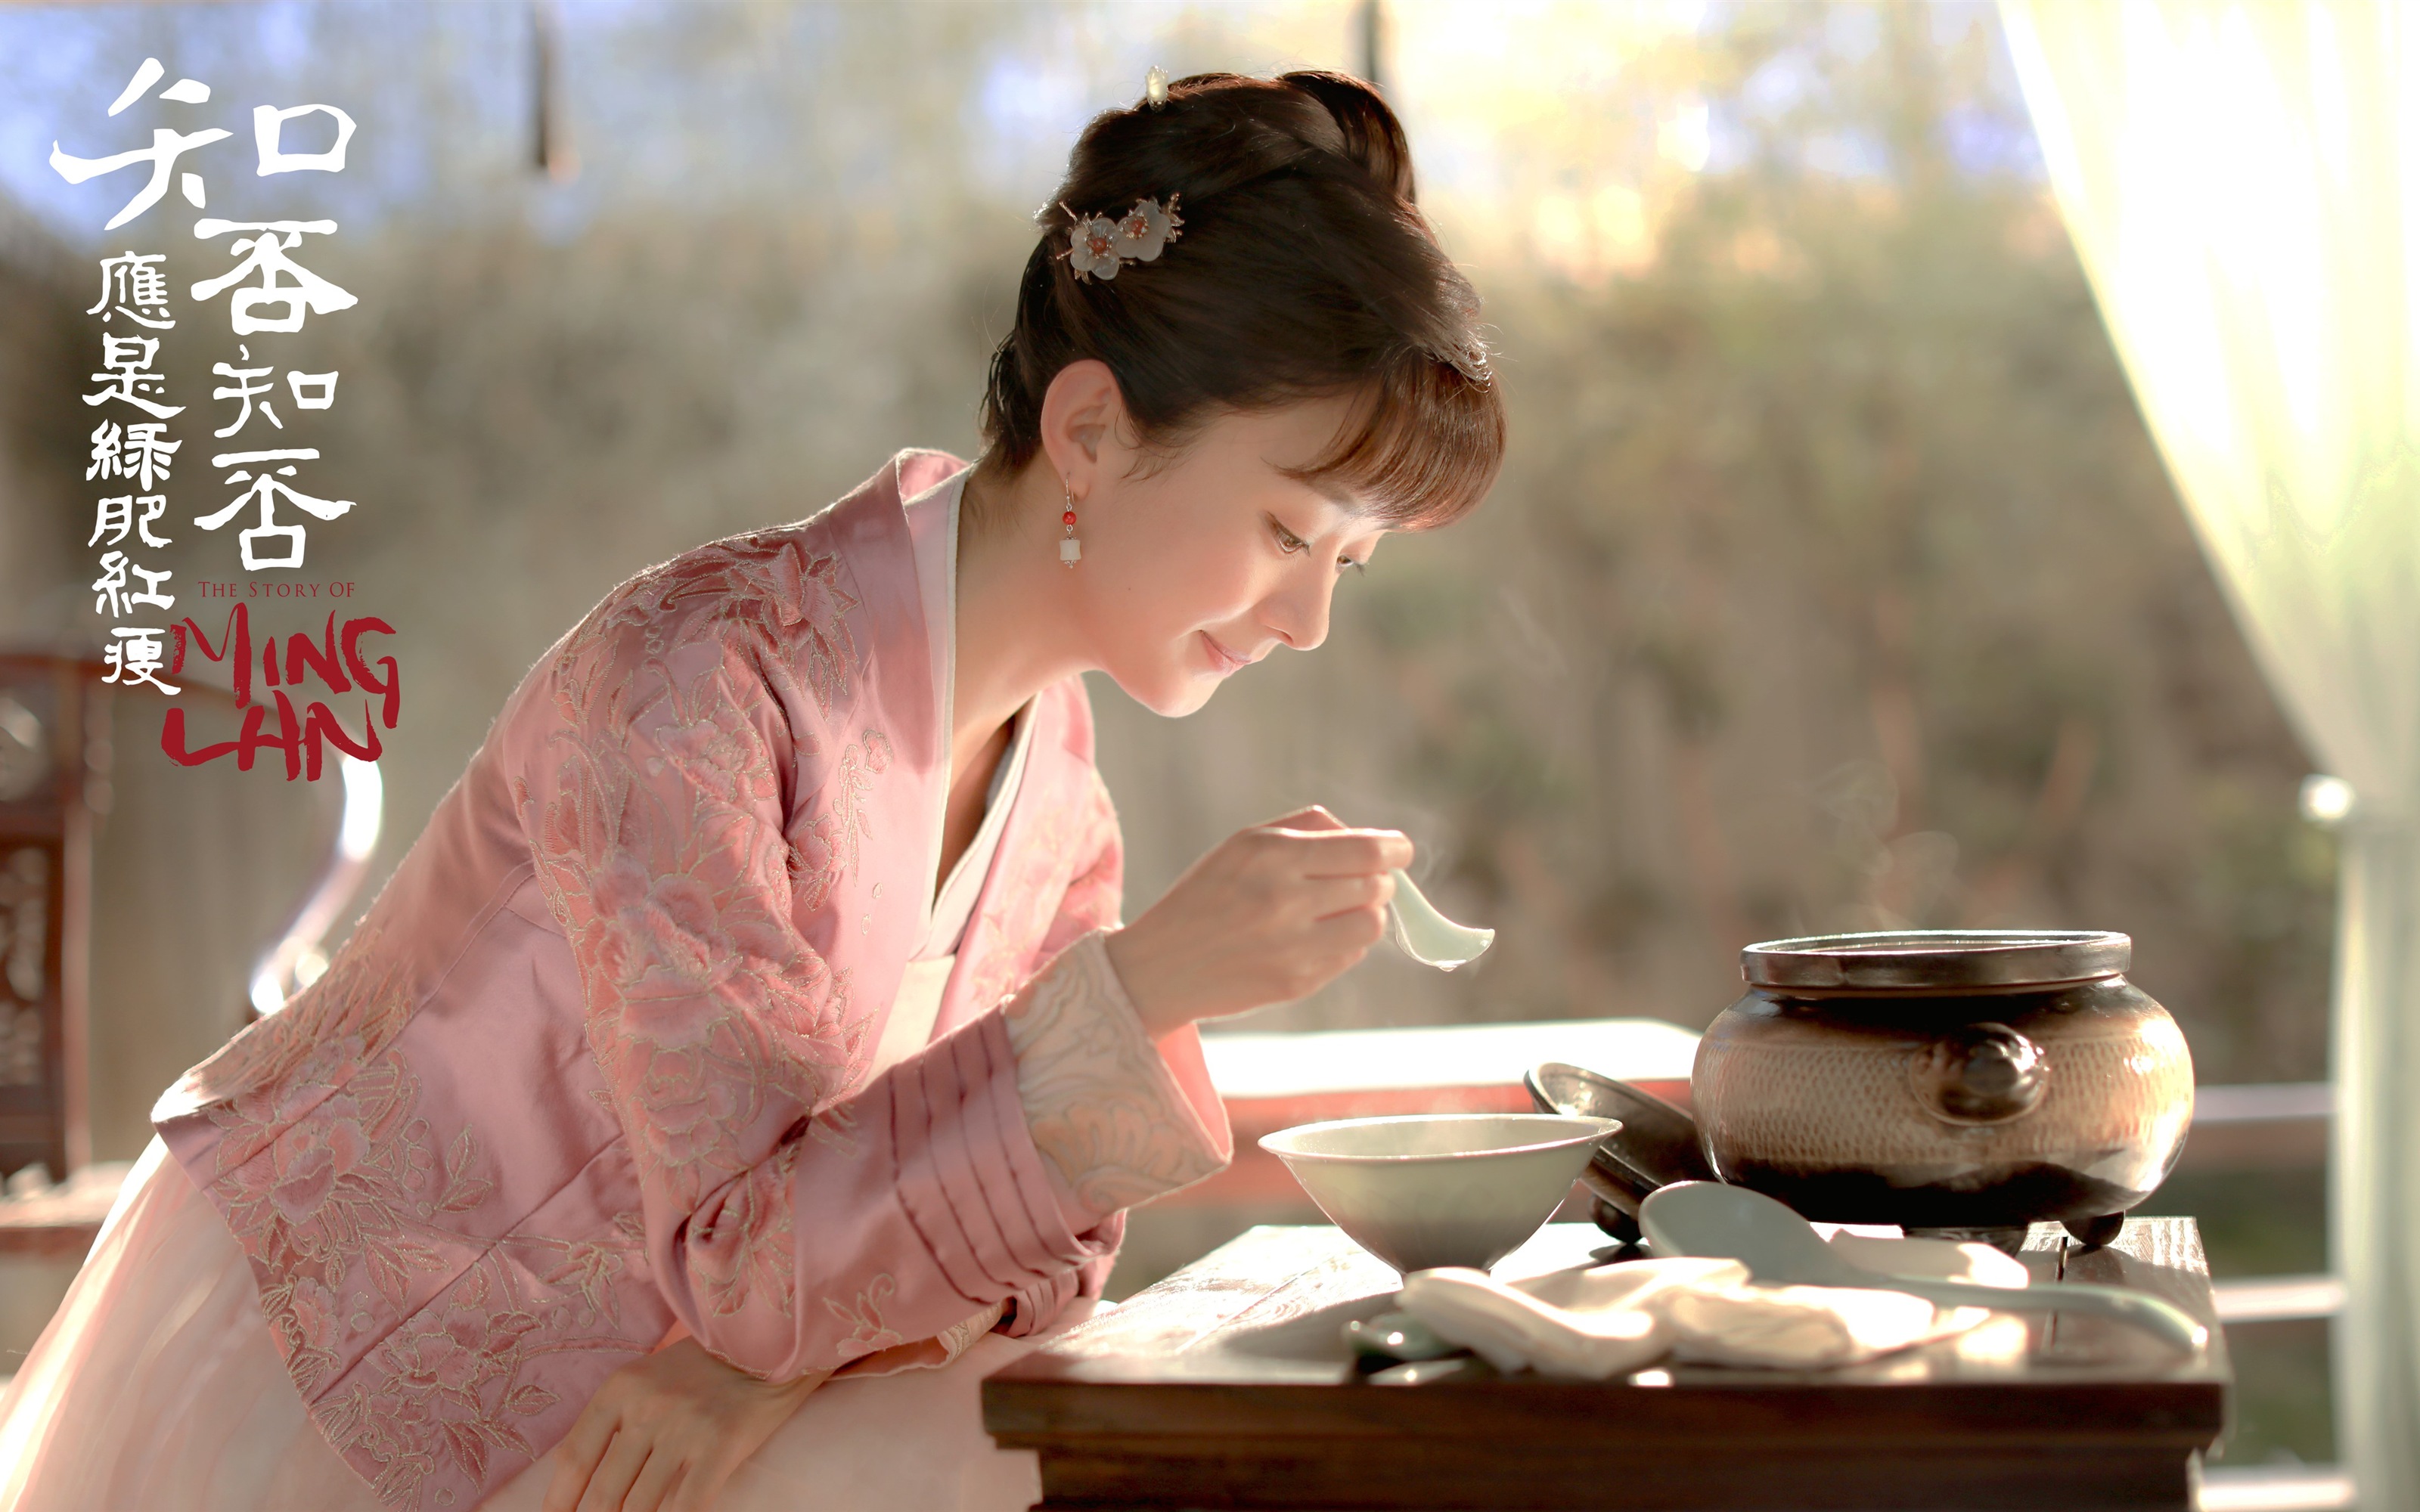 The Story Of MingLan, TV series HD wallpapers #29 - 3200x2000